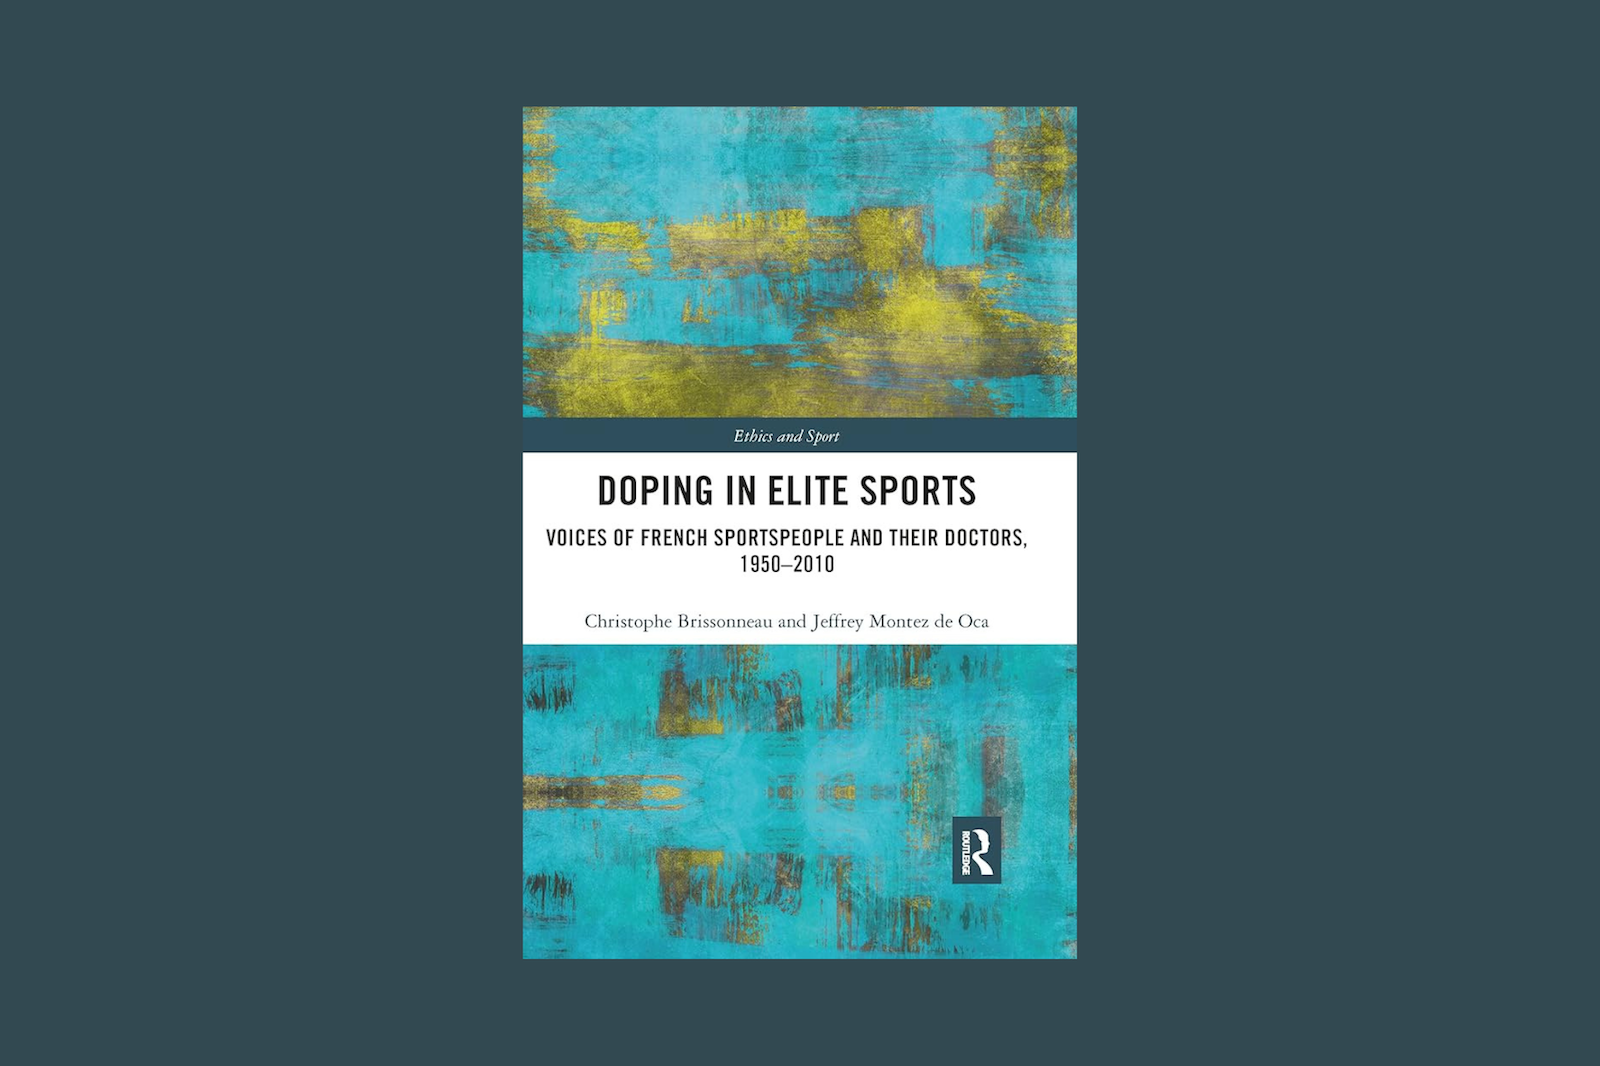 Photo of the book "Doping in Elite Sports: Voices of French Sportspeople and Their Doctors"